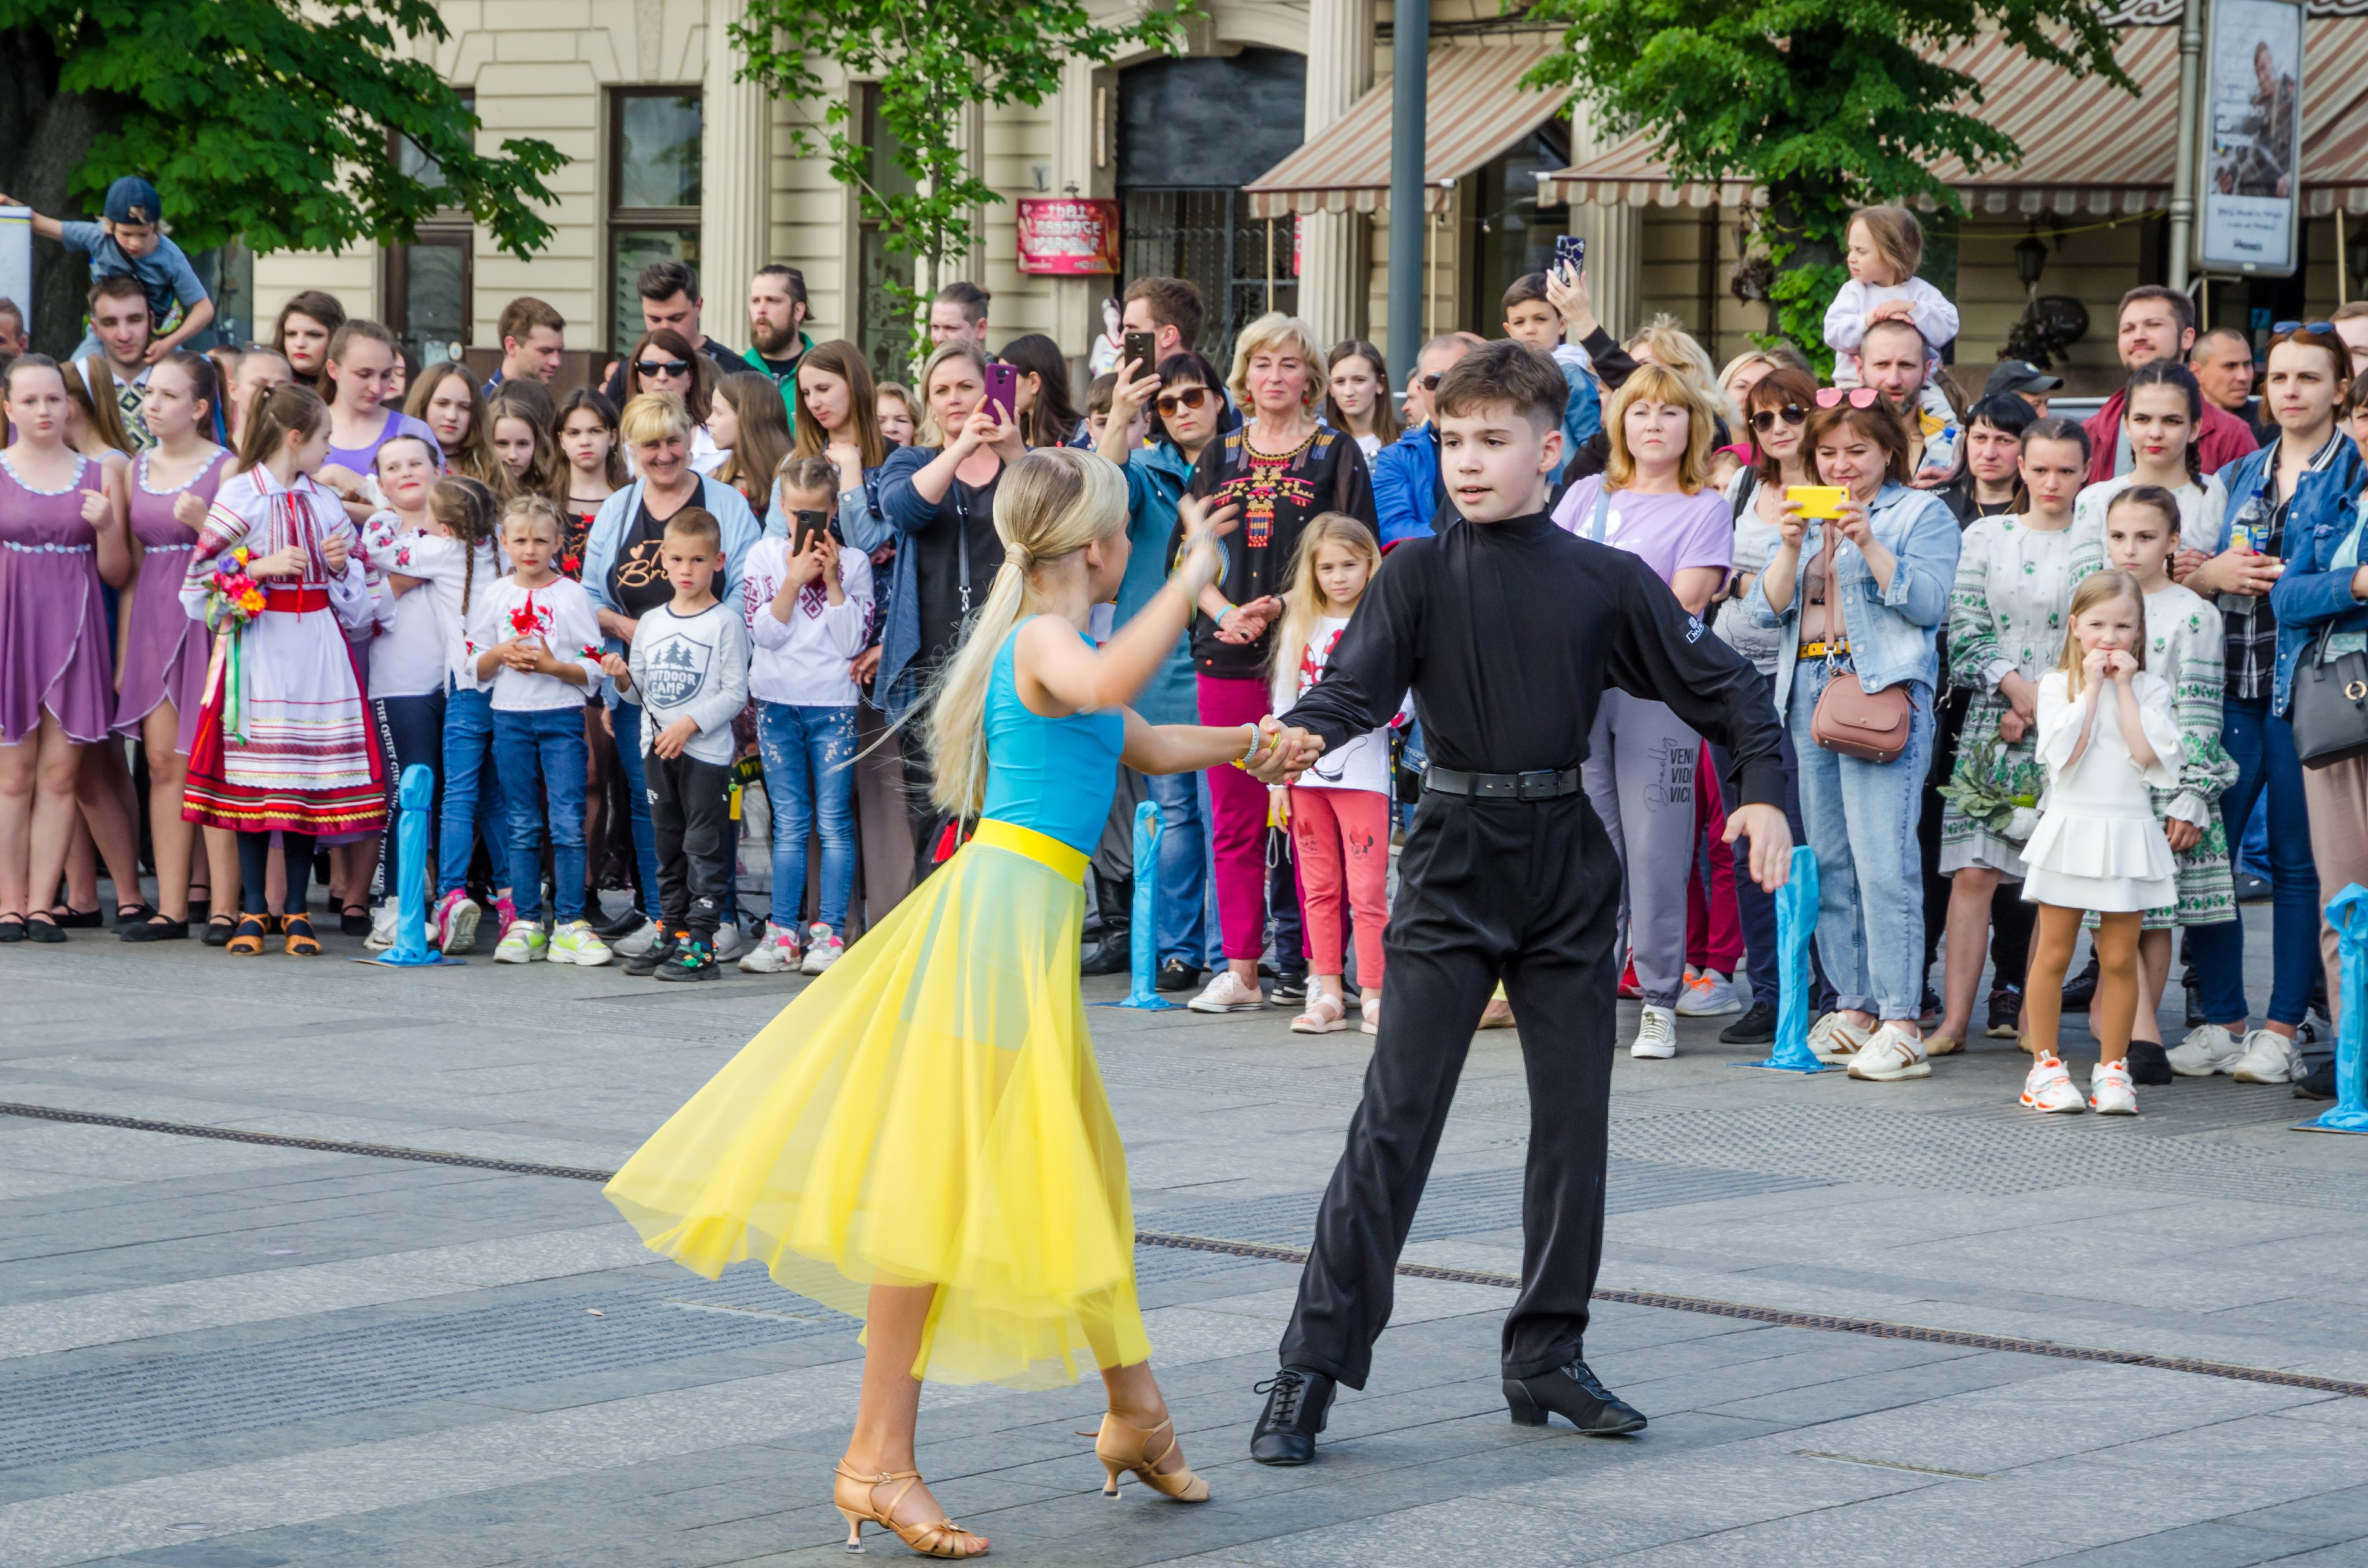 Charity dancing event by children in Lviv